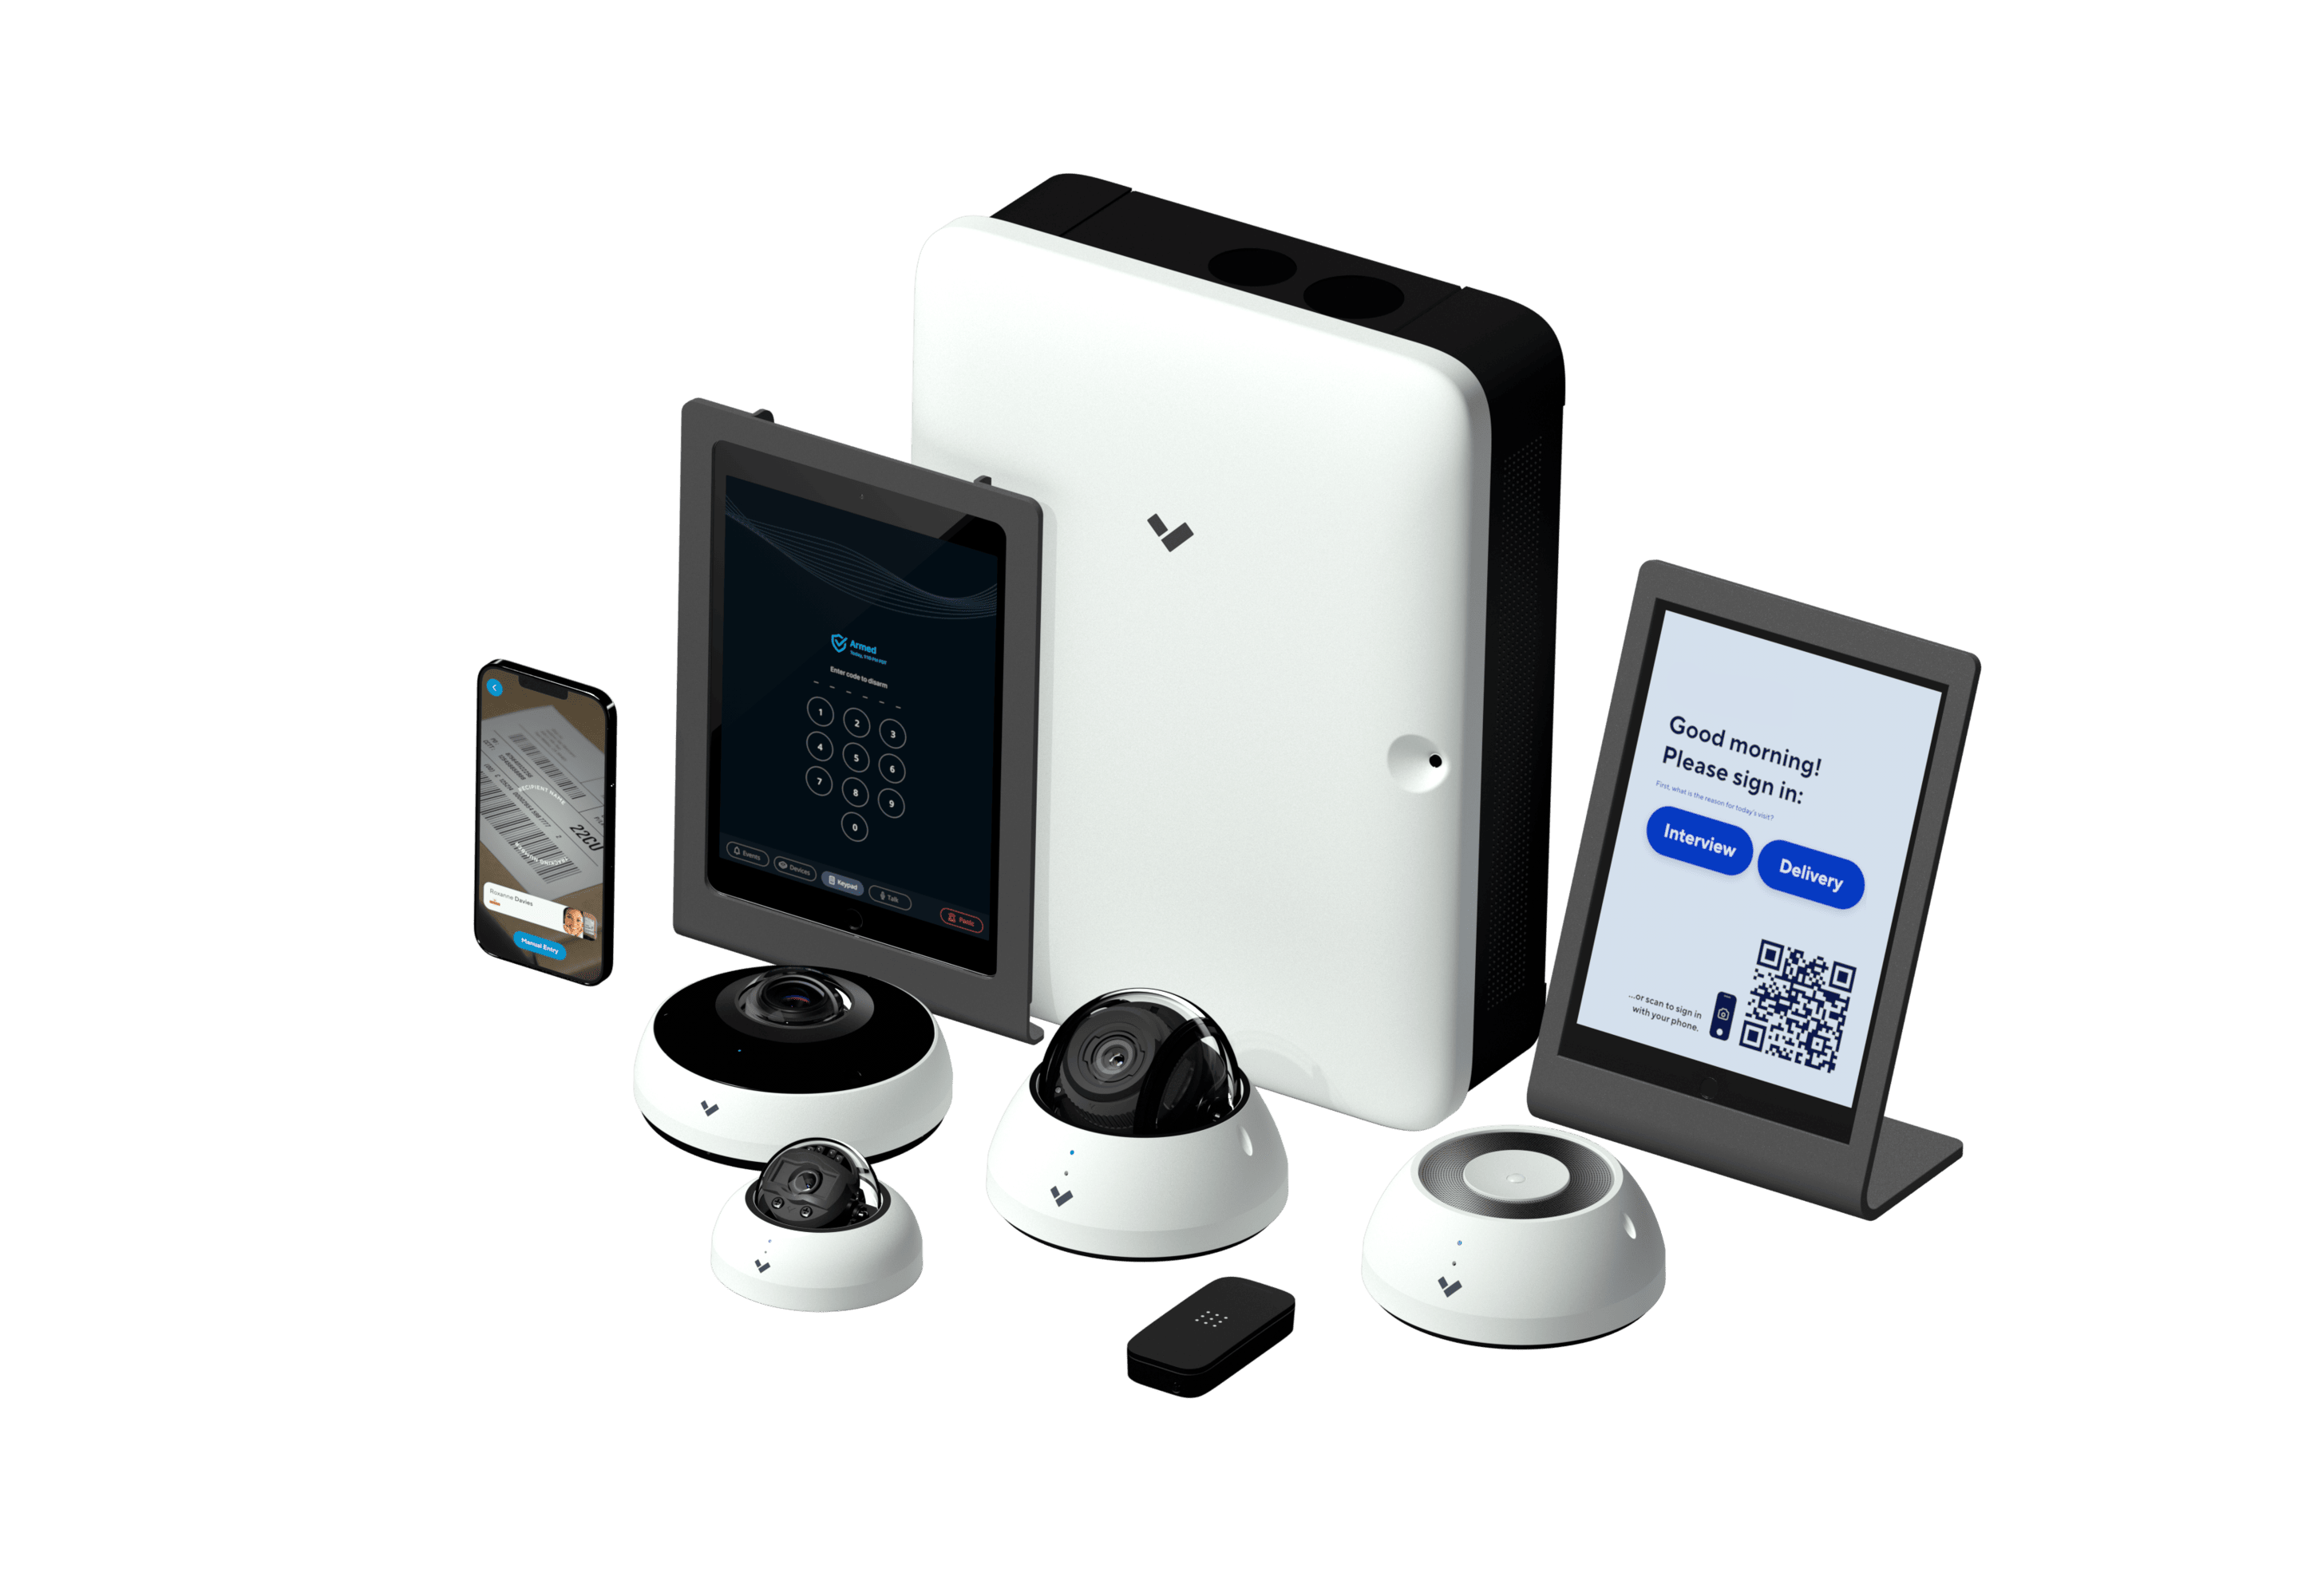 Verkada security cameras and devices equipped with audio